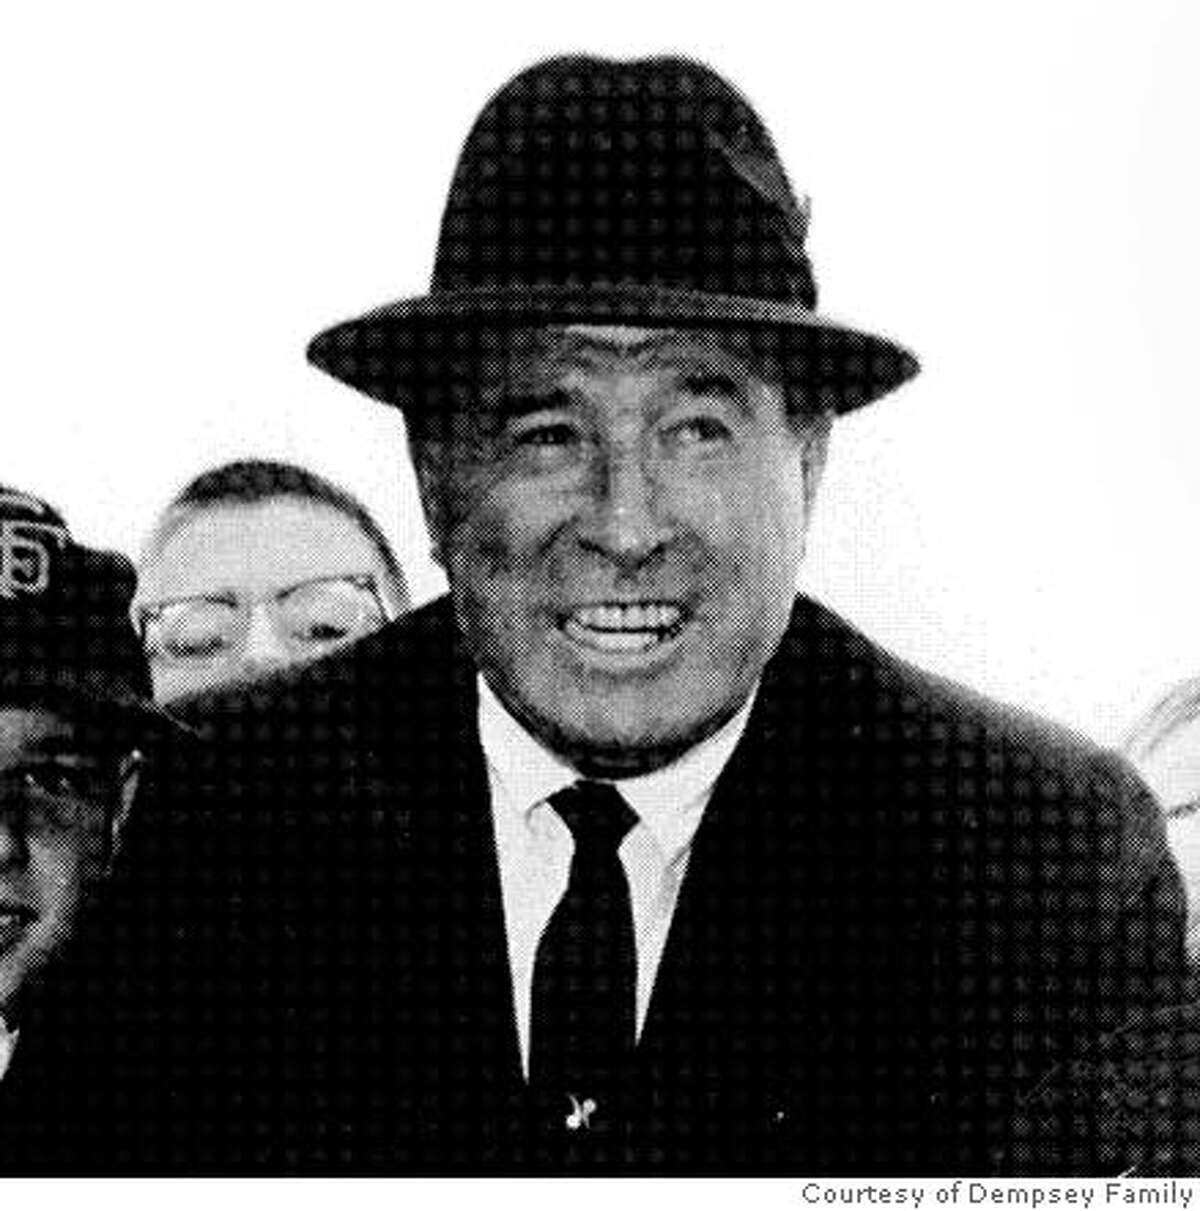 ###Live Caption:DEMPSEY_OBIT_002_ho.jpg Obit photo of Con Dempsey. Men, left to right: Joe DiMaggio, "Lefty" O'Doul and Con Dempsey. Children, left to right: Con Dempsey, Jr, David Dempsey. Photo taken in 1966 Photo courtesy the Dempsey family. Ran on: 08-09-2006 Con Dempsey (right, in cap) poses with Joe DiMaggio (left), Lefty O'Doul (center) and his children, Con Jr. and David.###Caption History:DEMPSEY_OBIT_002_ho.jpg Obit photo of Con Dempsey. Men, left to right: Joe DiMaggio, "Lefty" O'Doul and Con Dempsey. Children, left to right: Con Dempsey, Jr, David Dempsey. Photo taken in 1966 Photo courtesy the Dempsey family. Ran on: 08-09-2006 Con Dempsey (right, in cap) poses with Joe DiMaggio (left), Lefty ODoul (center) and his children, Con Jr. and David.###Notes:###Special Instructions: